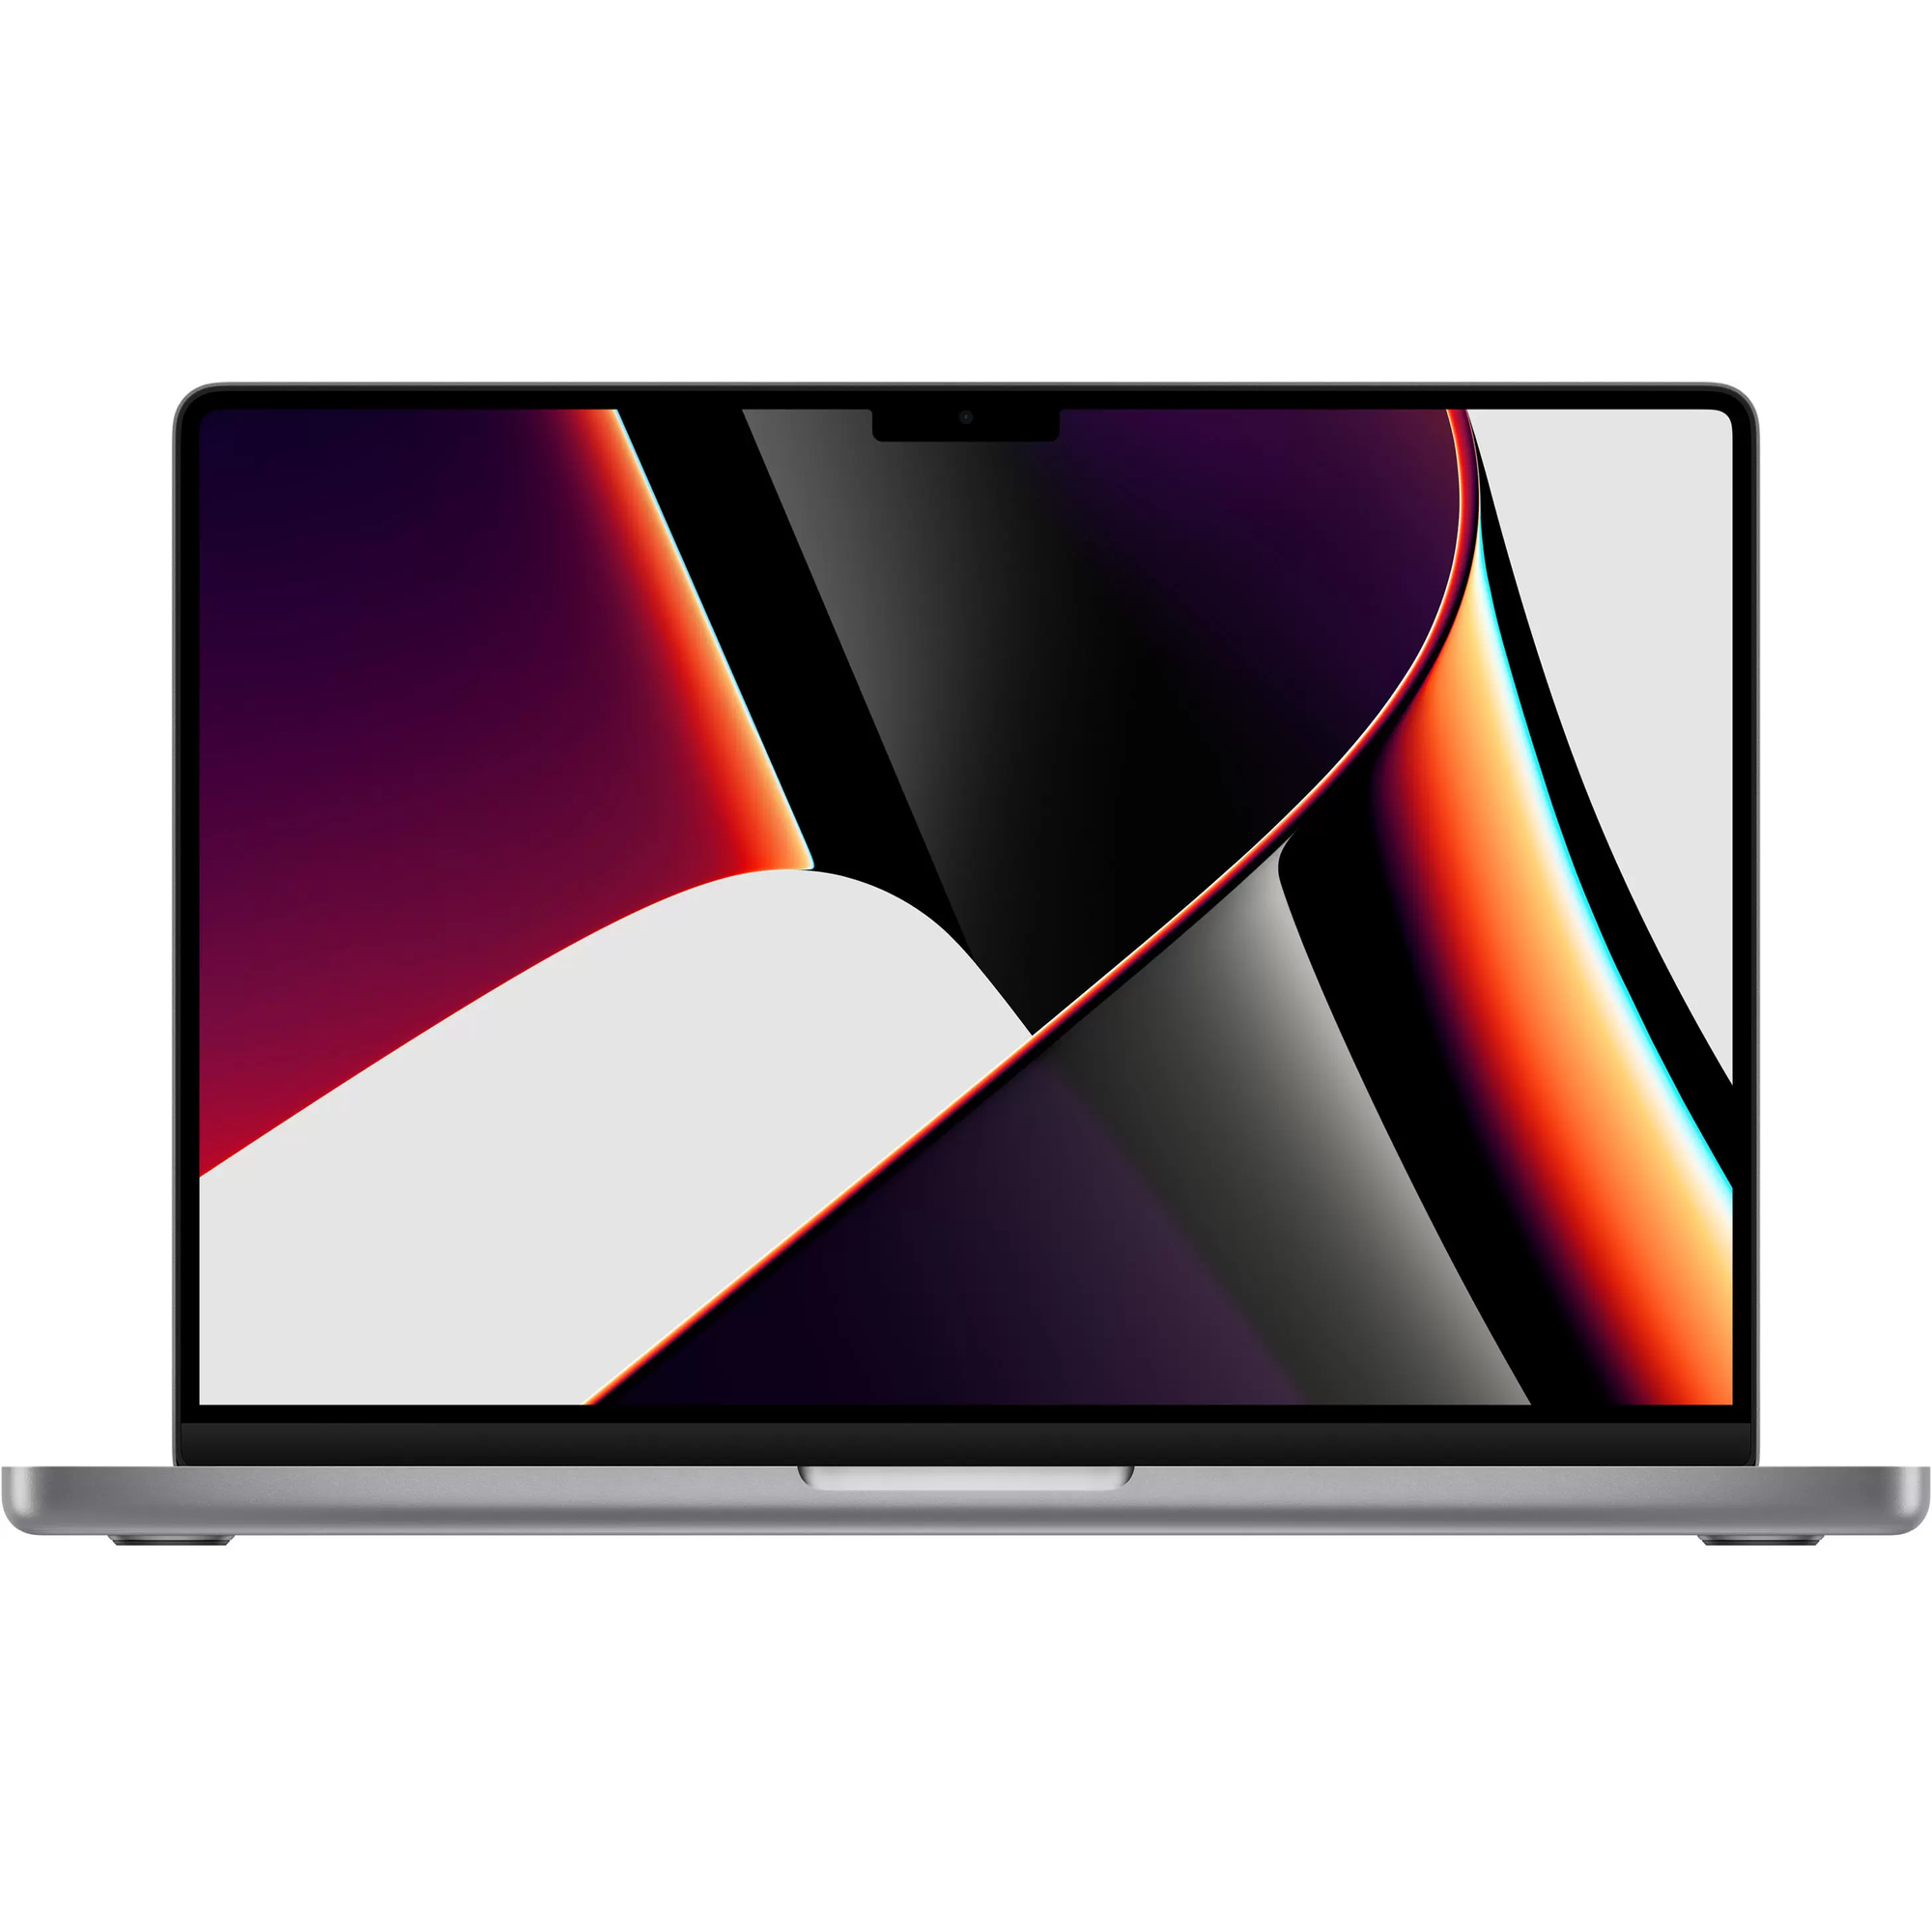 Apple MacBook Pro:16 M1 Max chip with 10-core CPU and 32-core GPU/64GB /2TB SSD - Space Grey